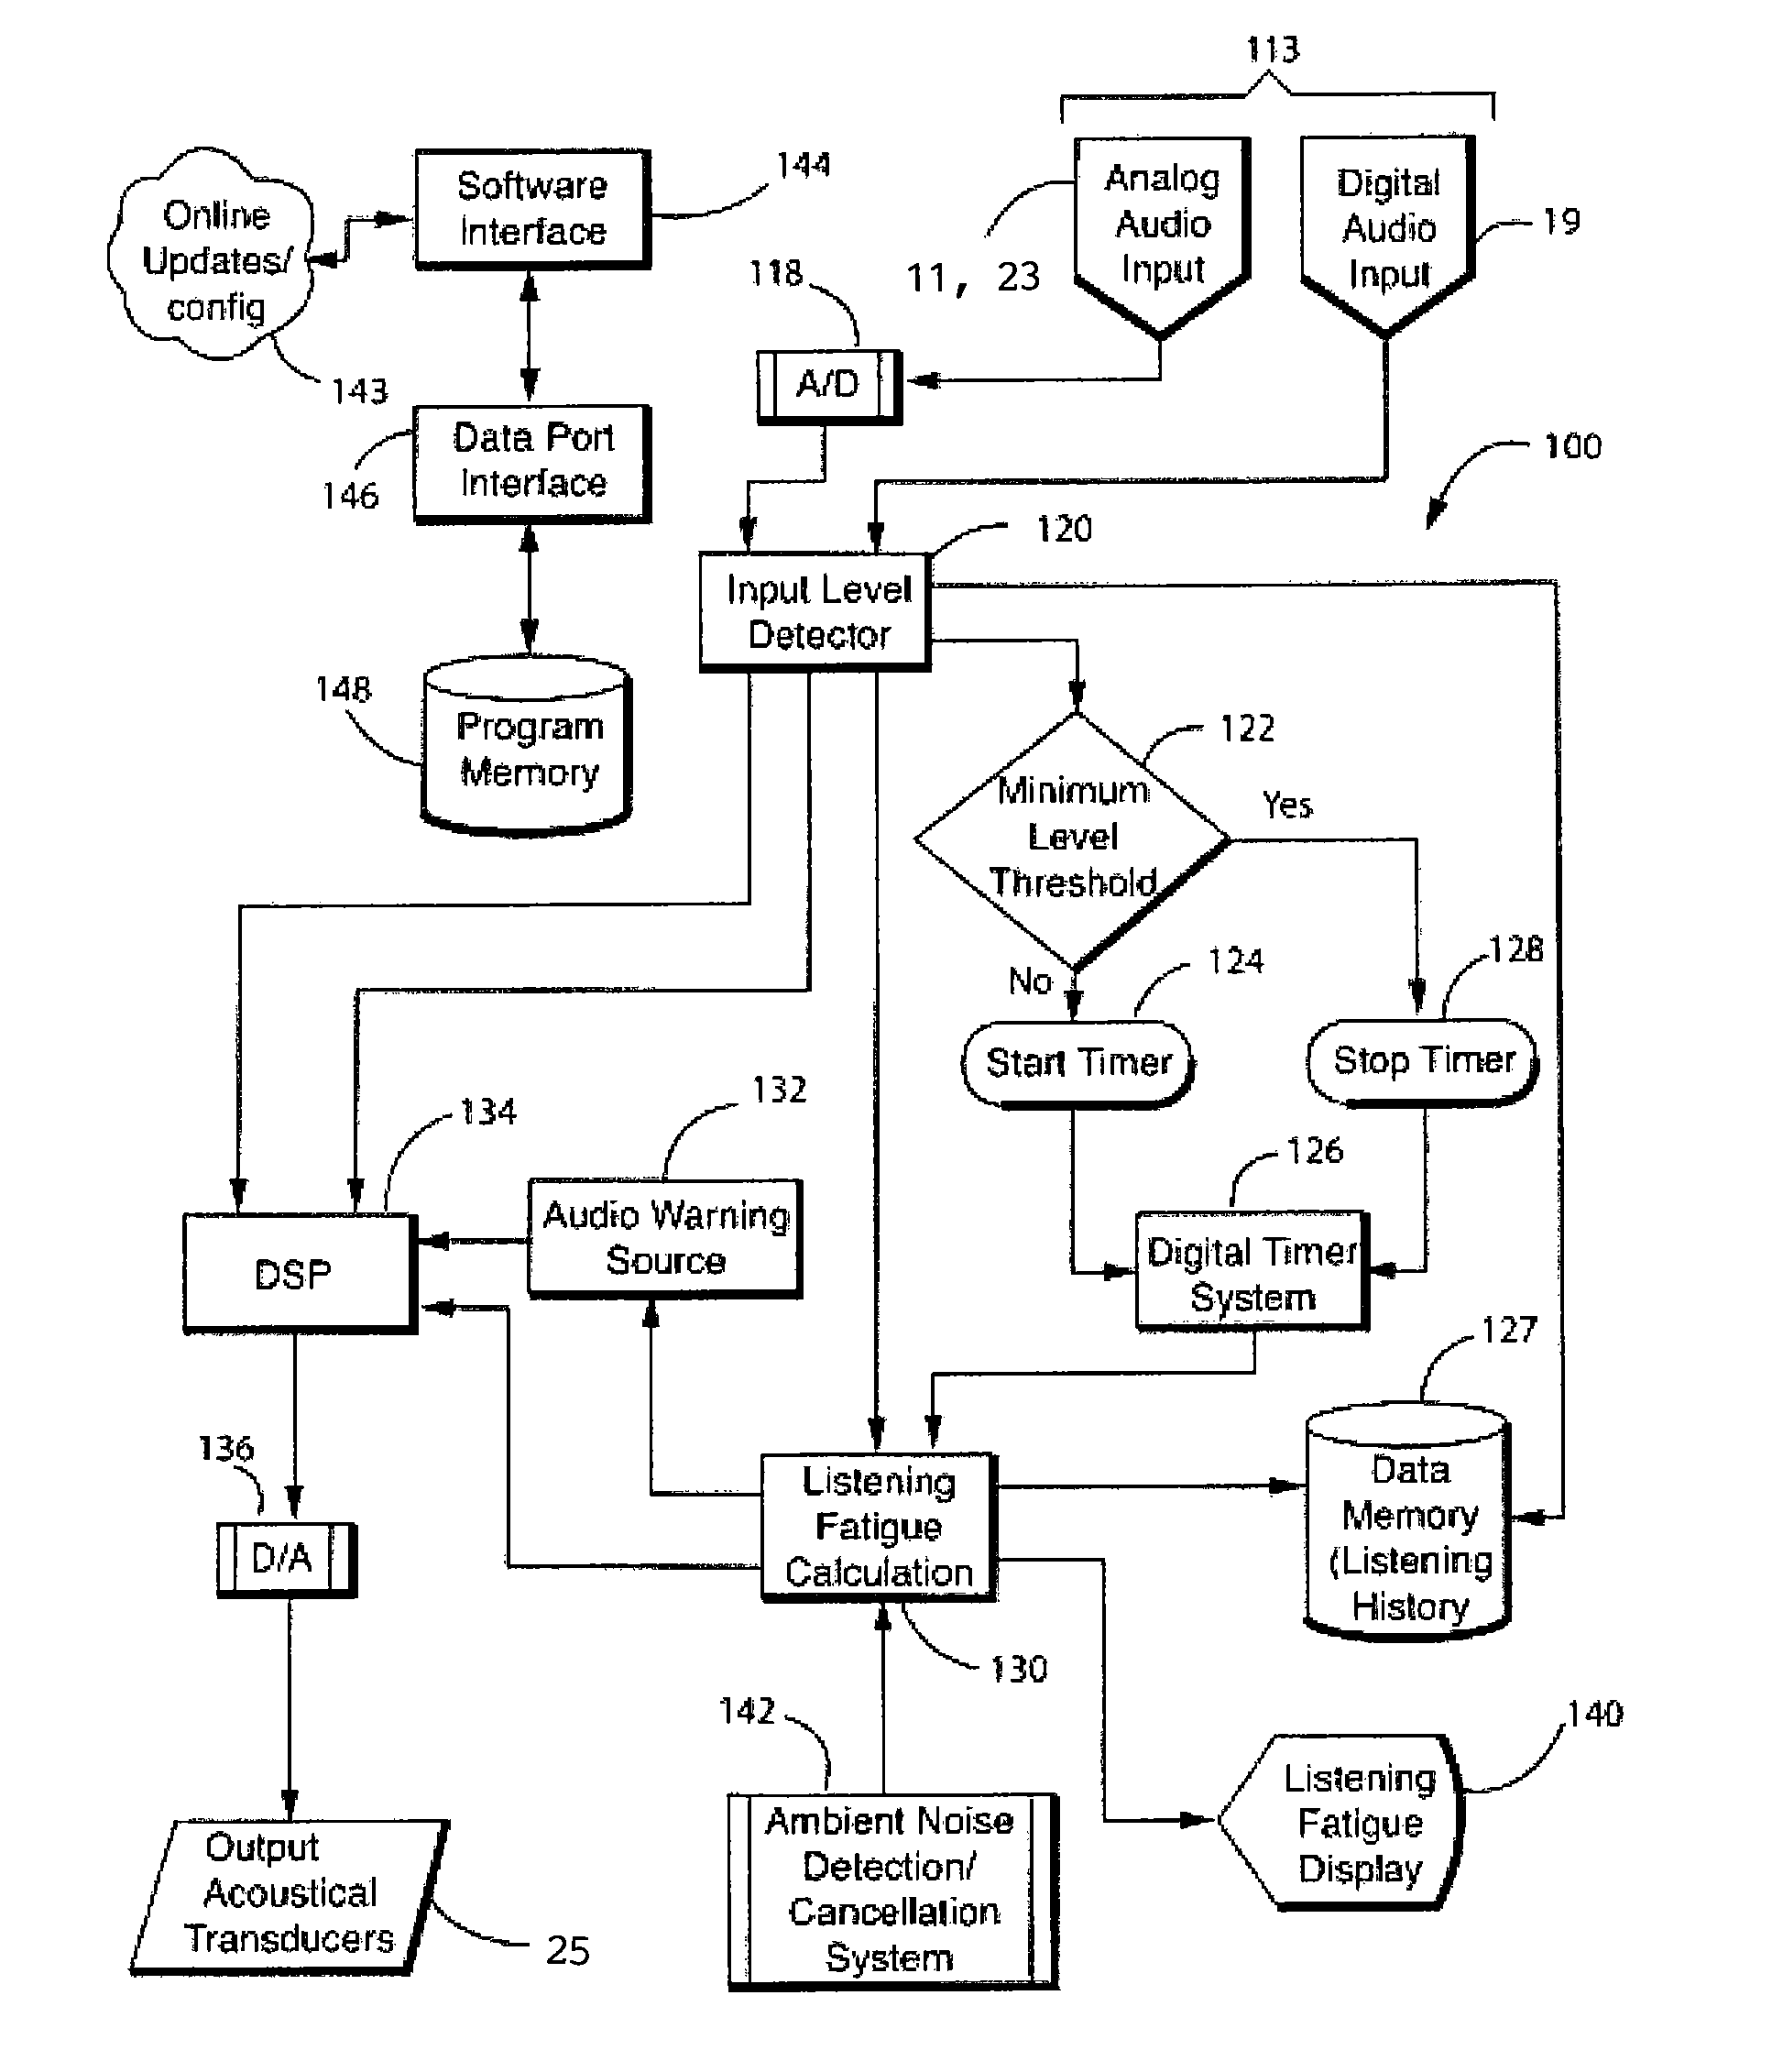 Sound pressure level monitoring and notification system